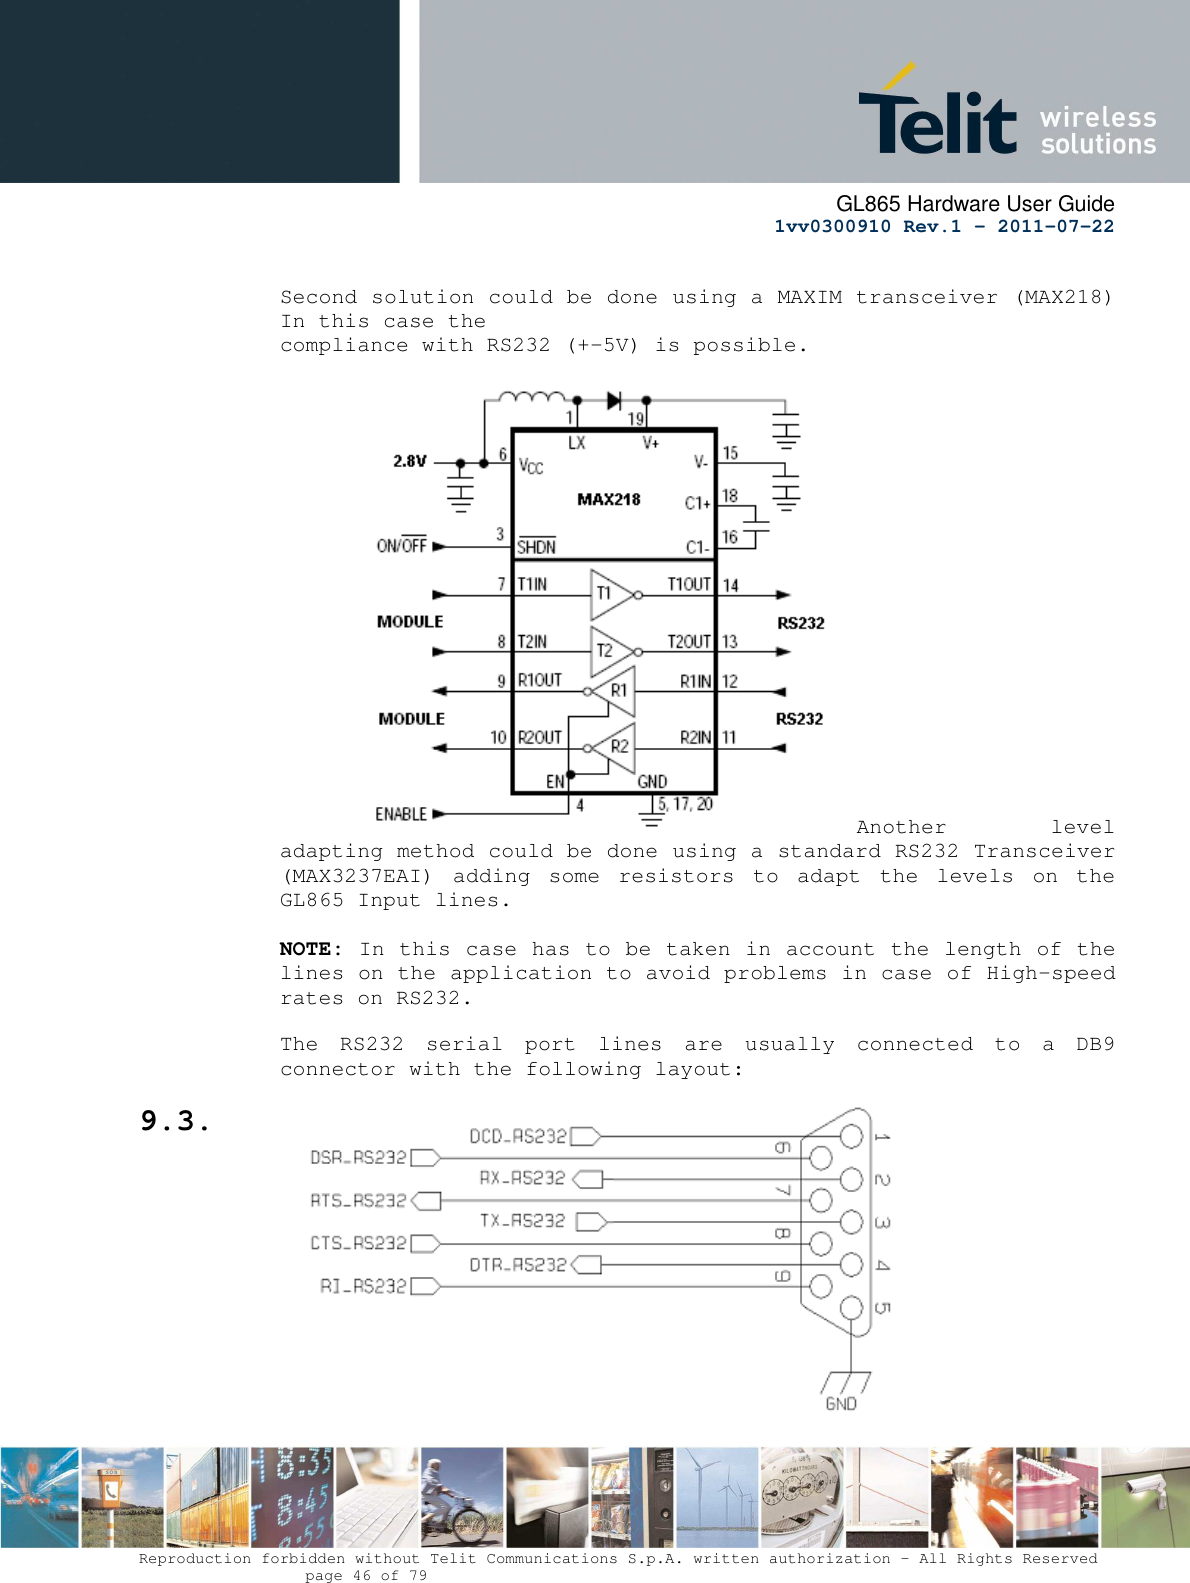      GL865 Hardware User Guide     1vv0300910 Rev.1 – 2011-07-22       Reproduction forbidden without Telit Communications S.p.A. written authorization - All Rights Reserved    page 46 of 79   Second solution could be done using a MAXIM transceiver (MAX218) In this case the compliance with RS232 (+-5V) is possible.                    Another  level adapting method could be done using a standard RS232 Transceiver (MAX3237EAI)  adding  some  resistors  to  adapt  the  levels  on  the GL865 Input lines.  NOTE: In this case has to be taken in account the length of the lines on the application to avoid problems in case of High-speed rates on RS232.  The  RS232  serial  port  lines  are  usually  connected  to  a  DB9 connector with the following layout: 9.3.  